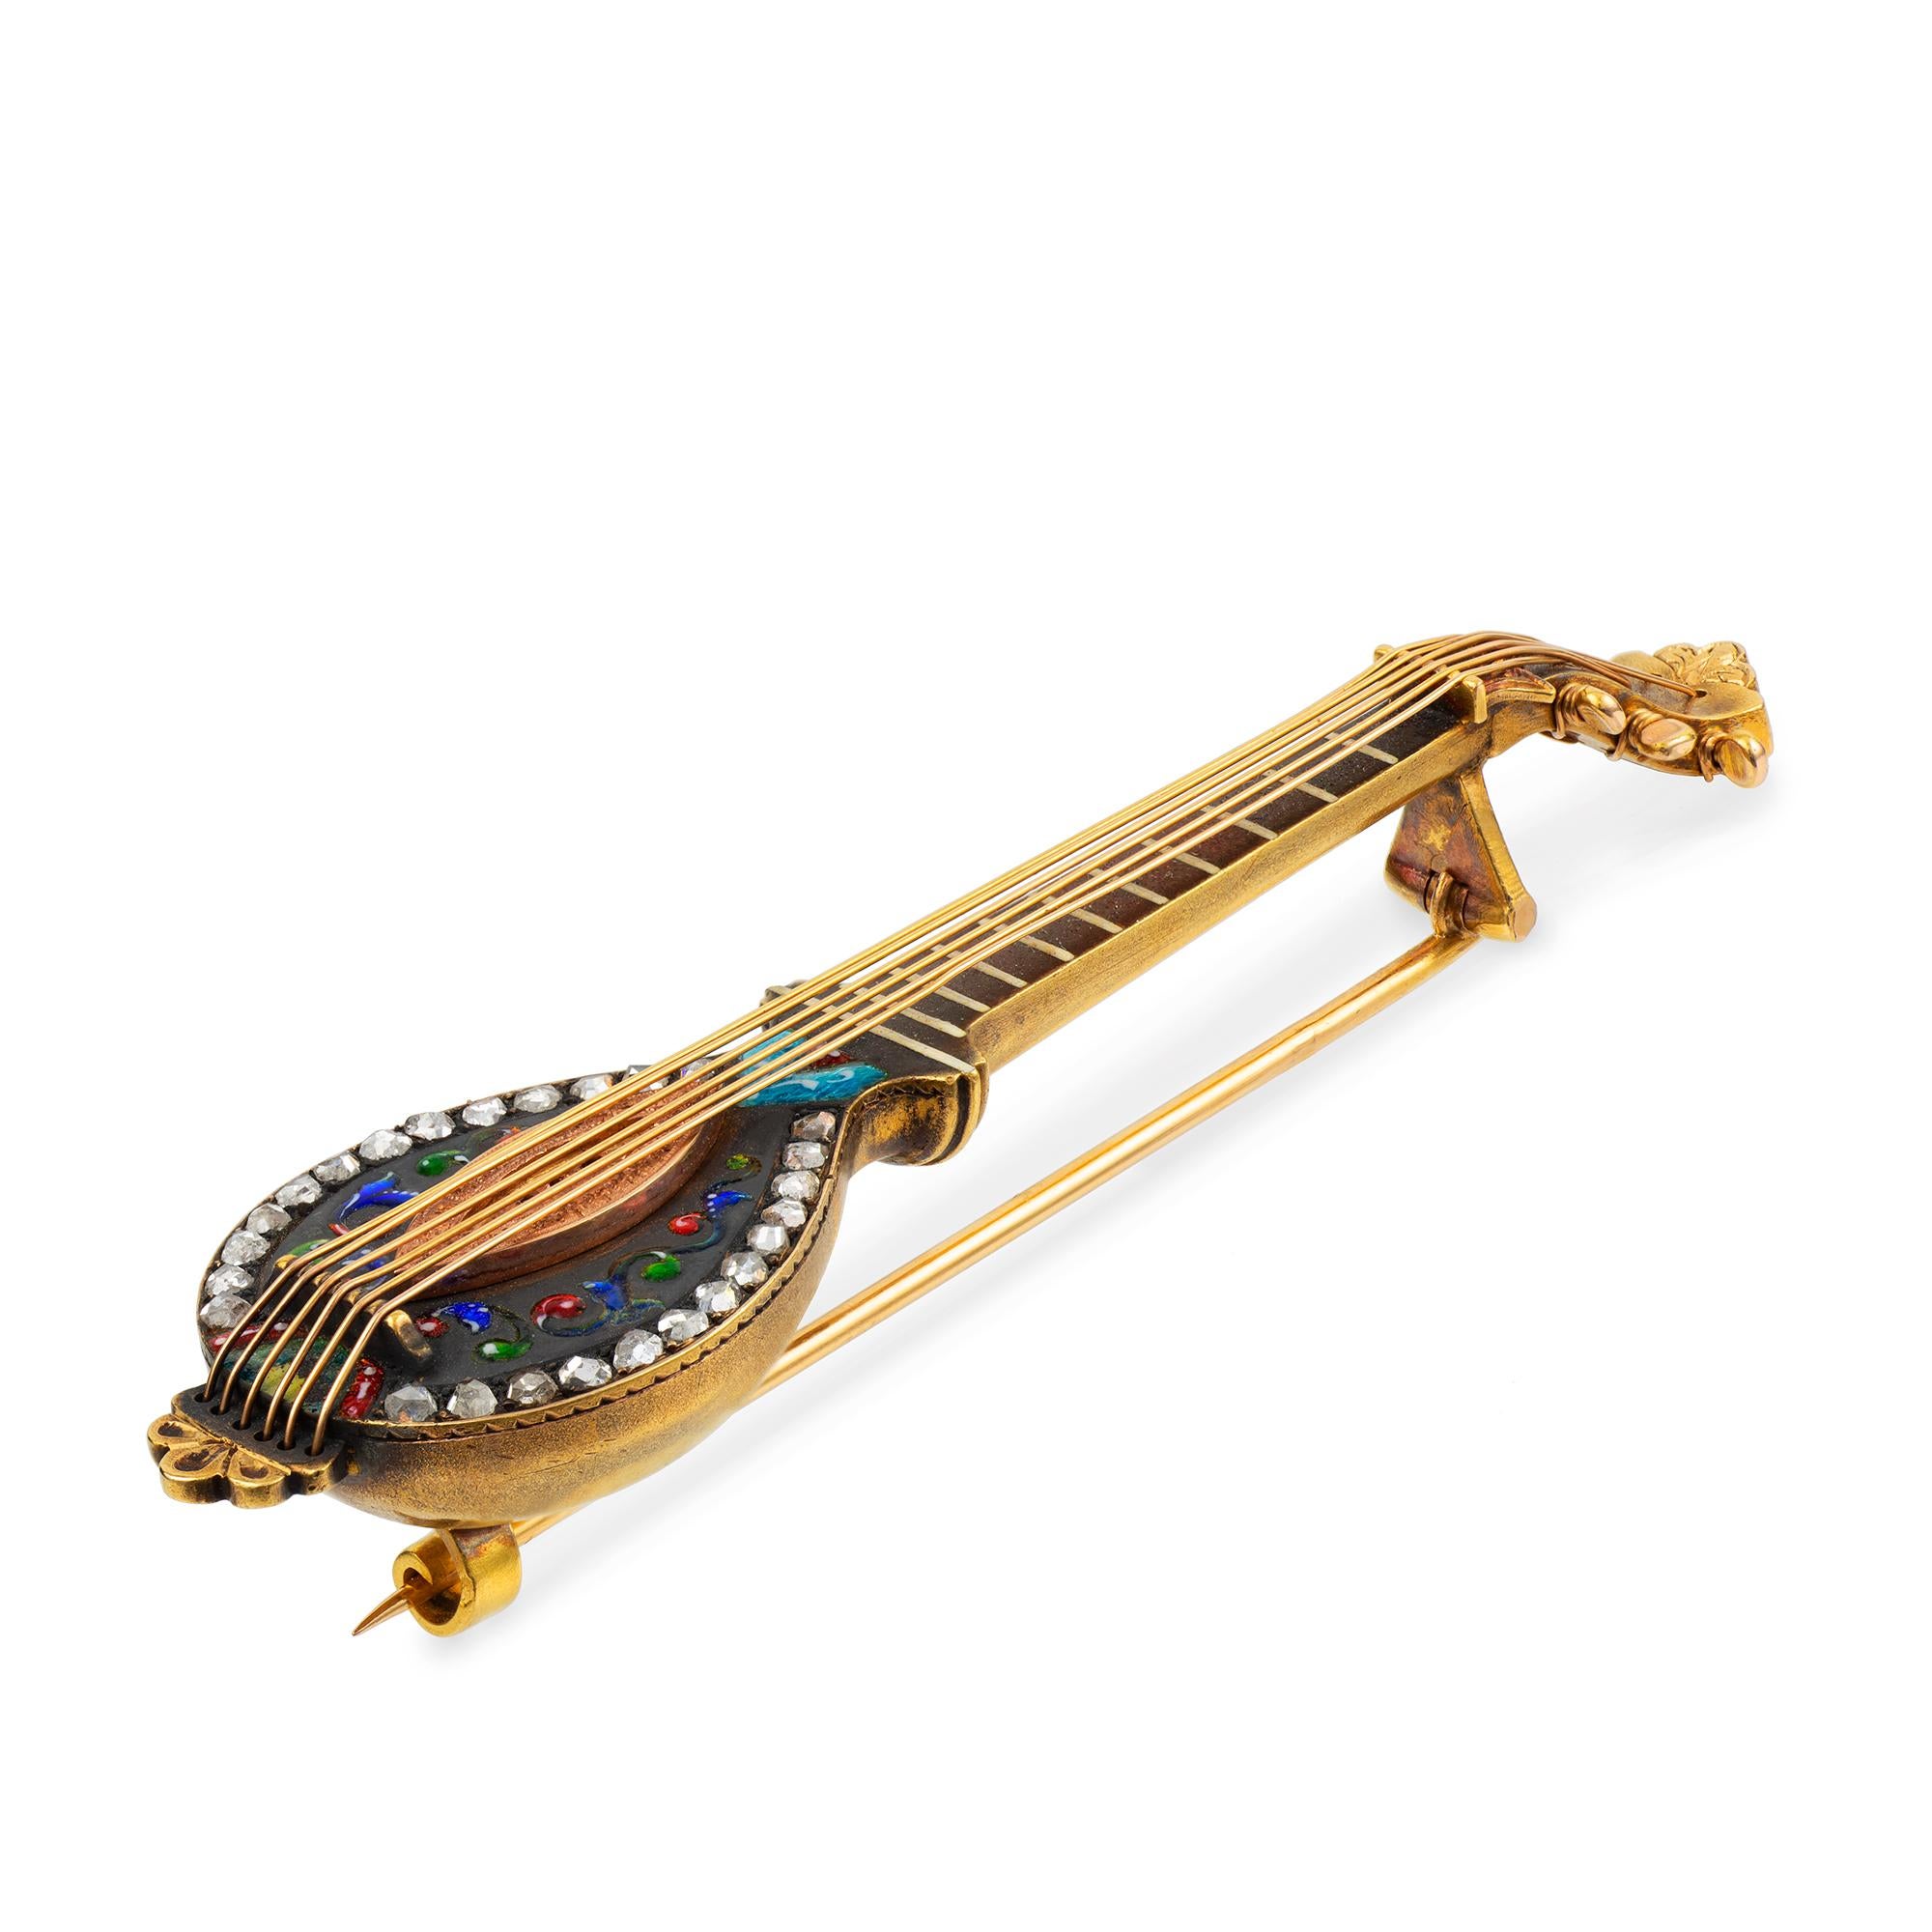 A late 19th century mandolin brooch, realistically formed and encrusted with rose-cut diamonds and multi-colour enamel, on a black patinated background within yellow gold mount, bearing French hallmark and makers-mark, measuring approximately 7 x